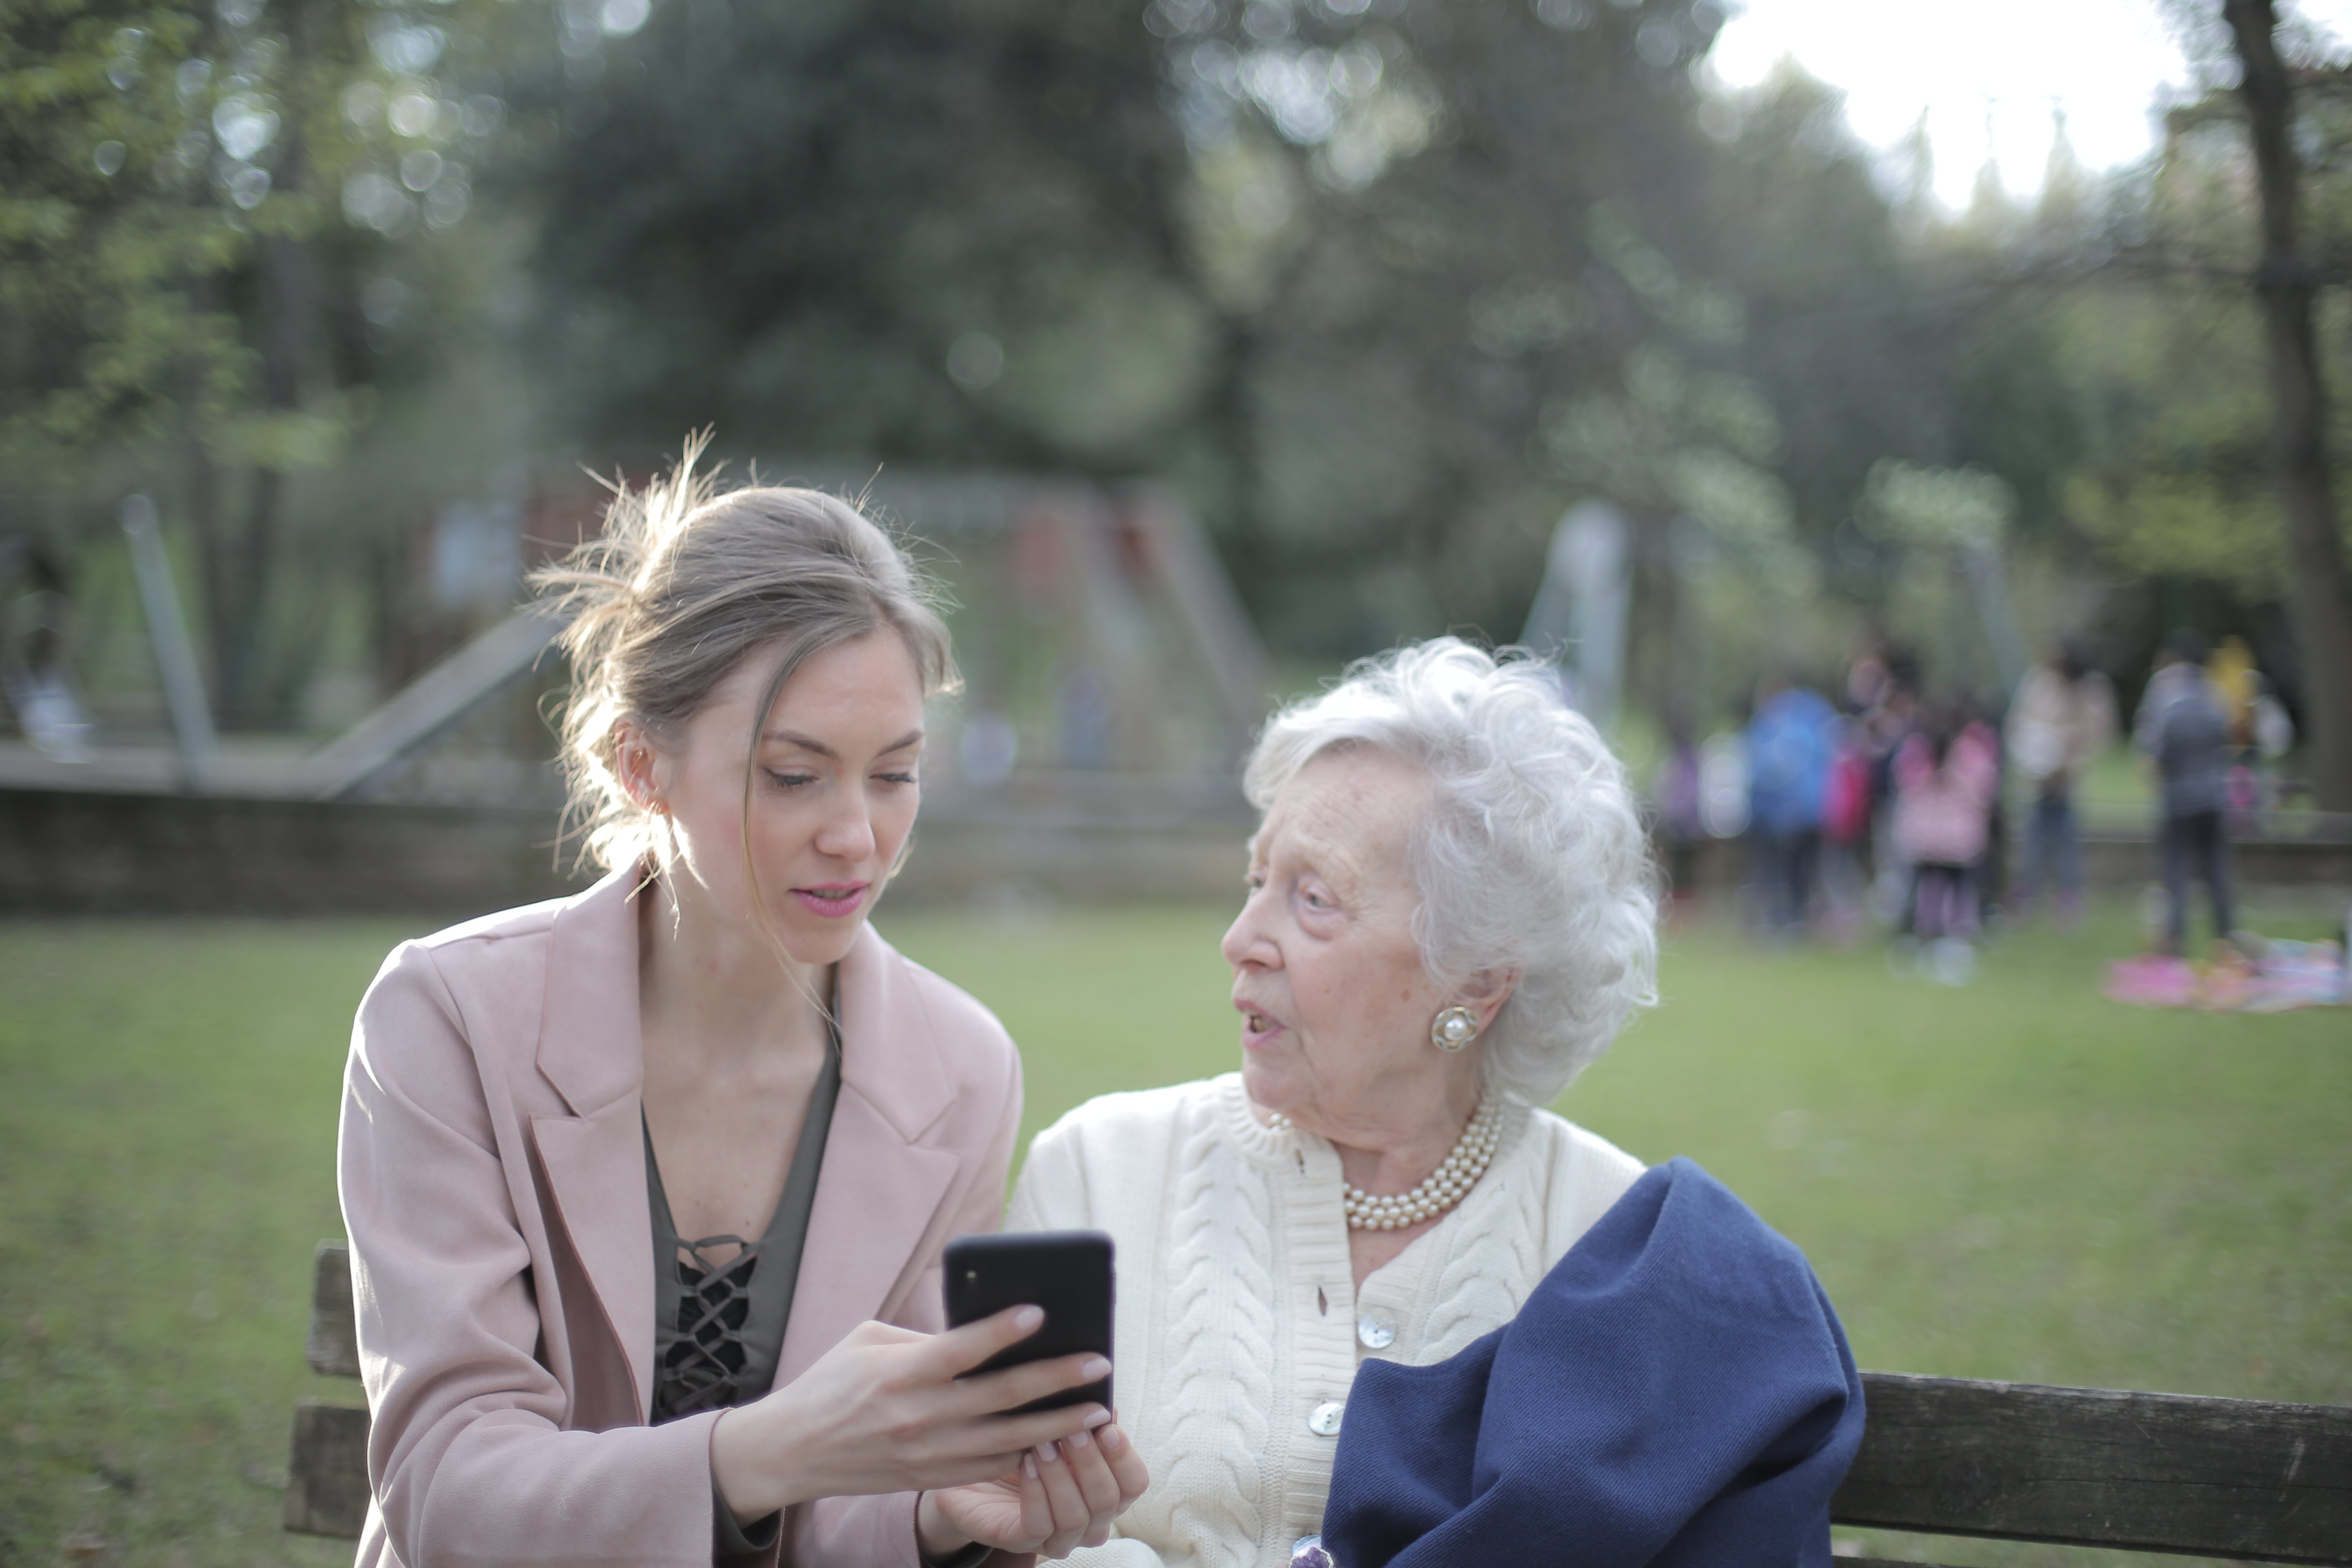 A younger woman showing an older one something on her phone while outside | Source: Pexels